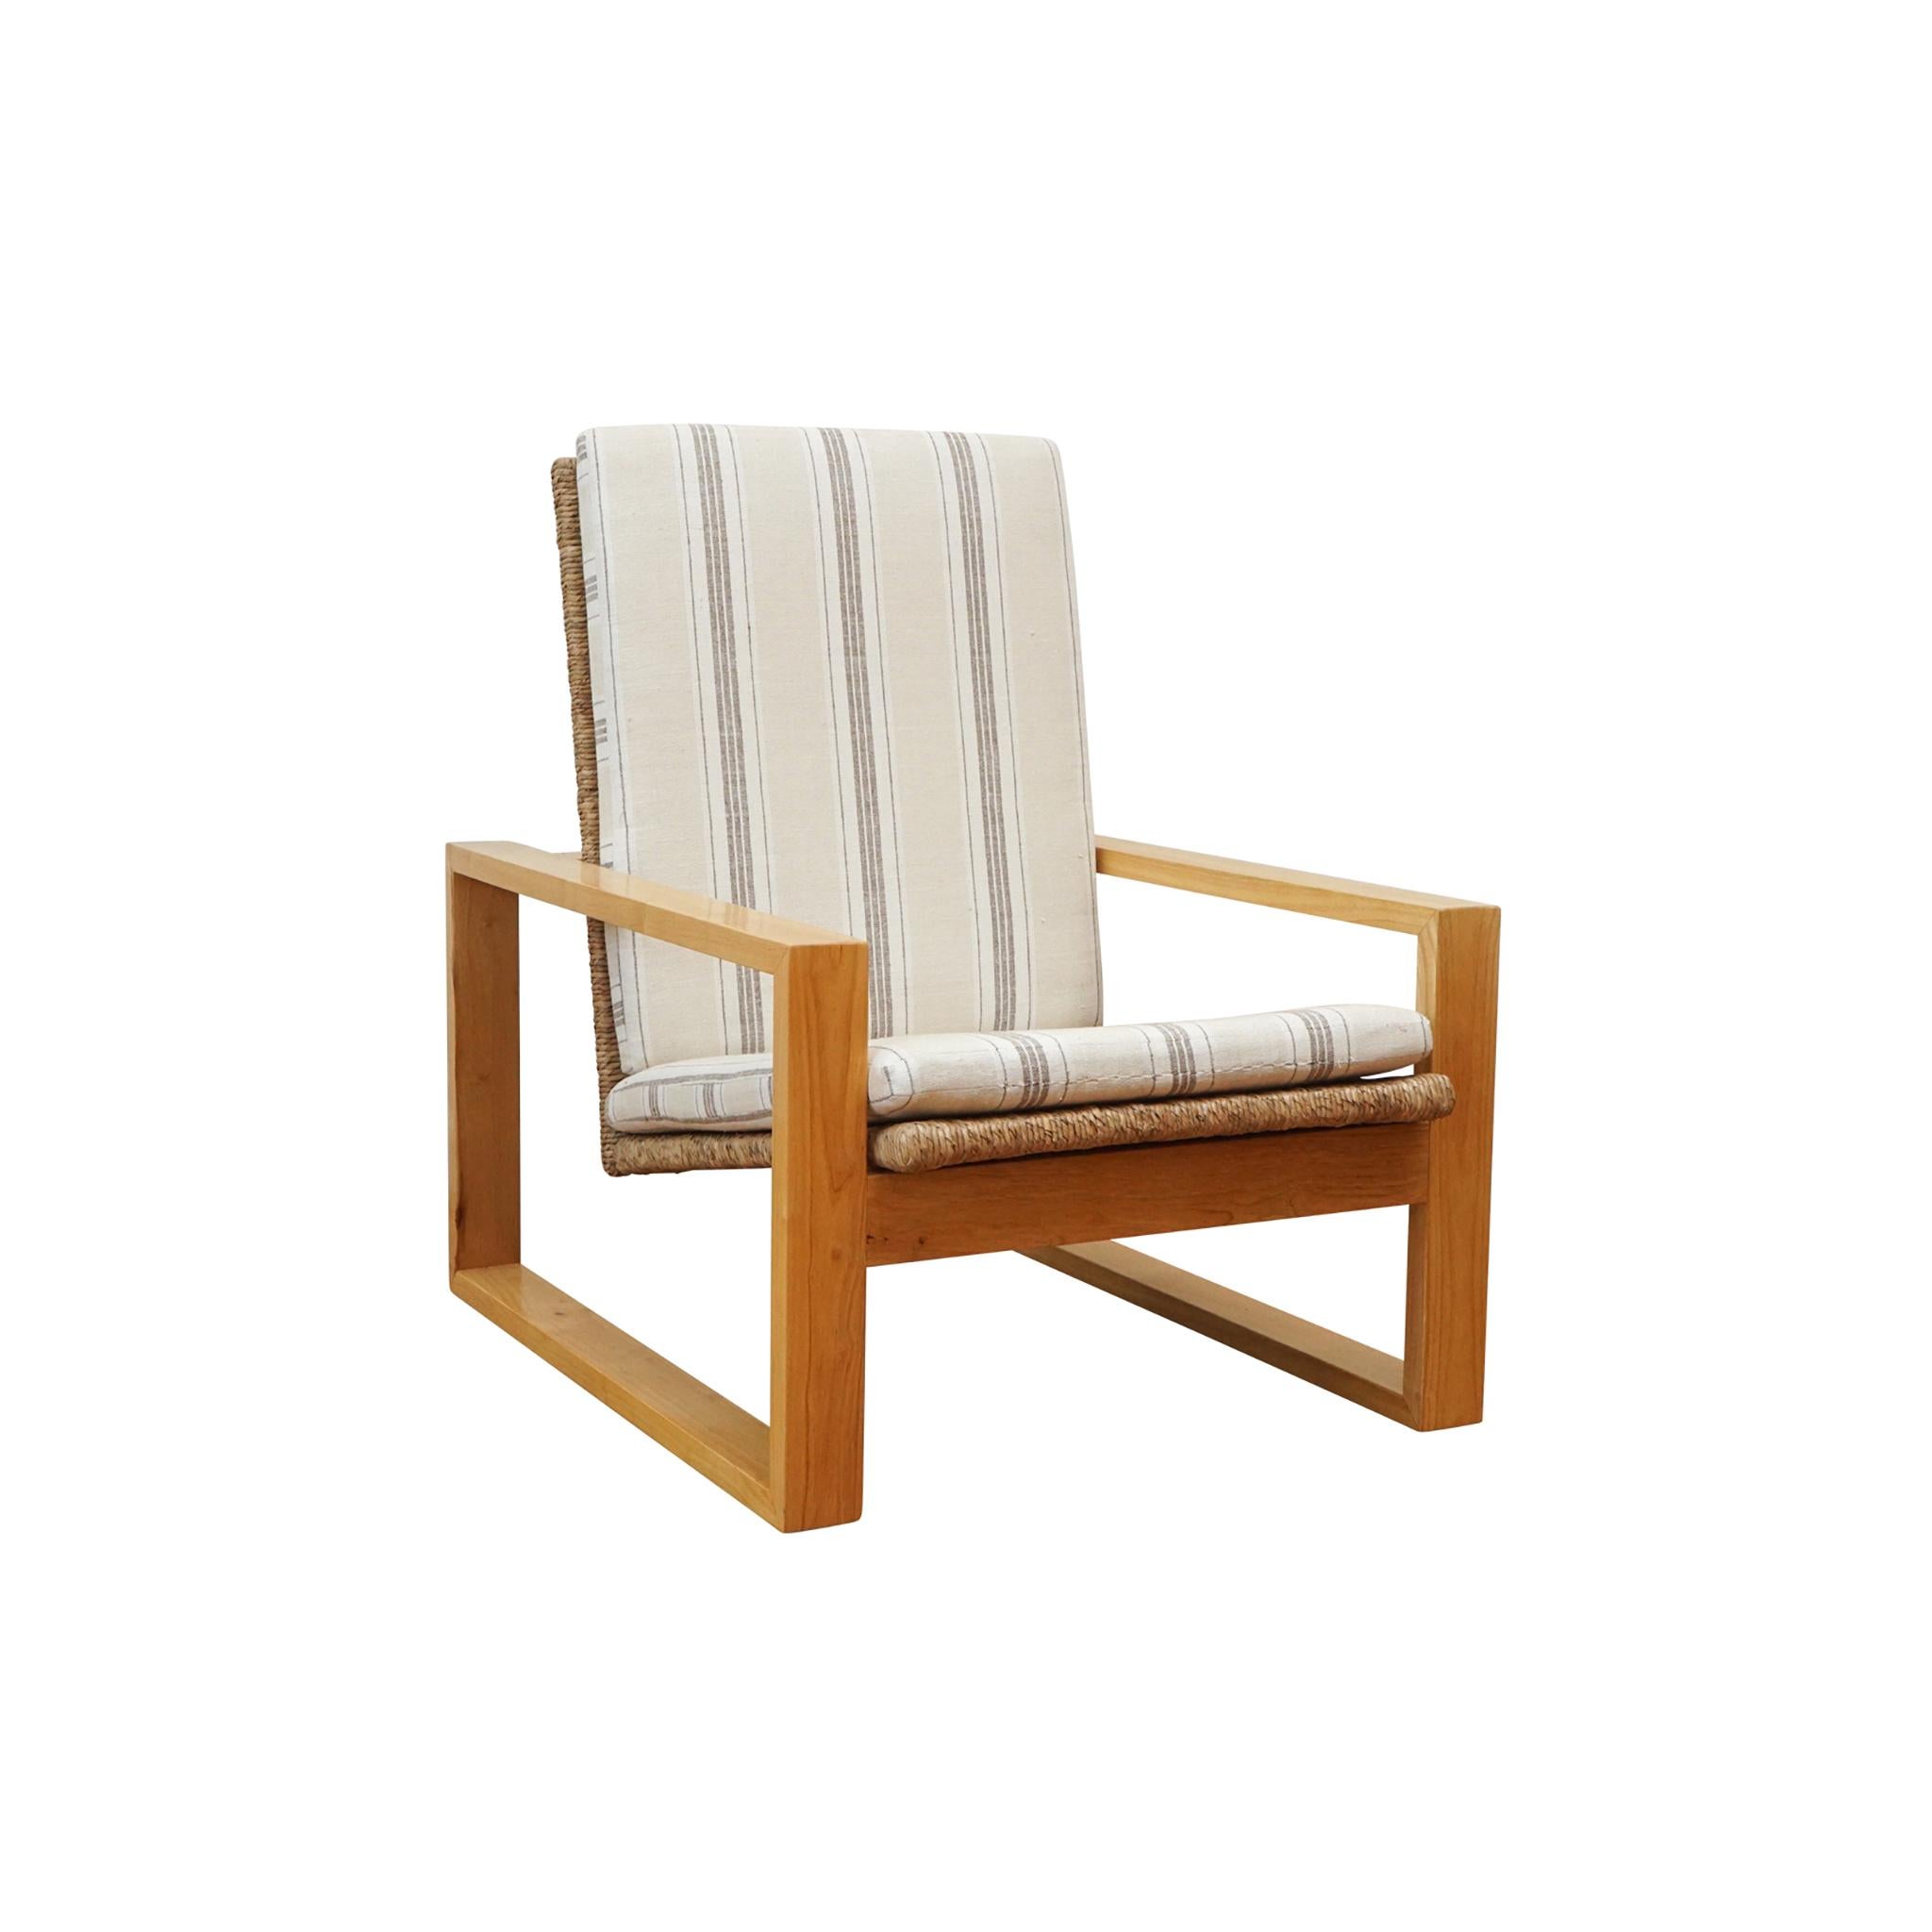 Contemporary Wood and braided abaca chair 